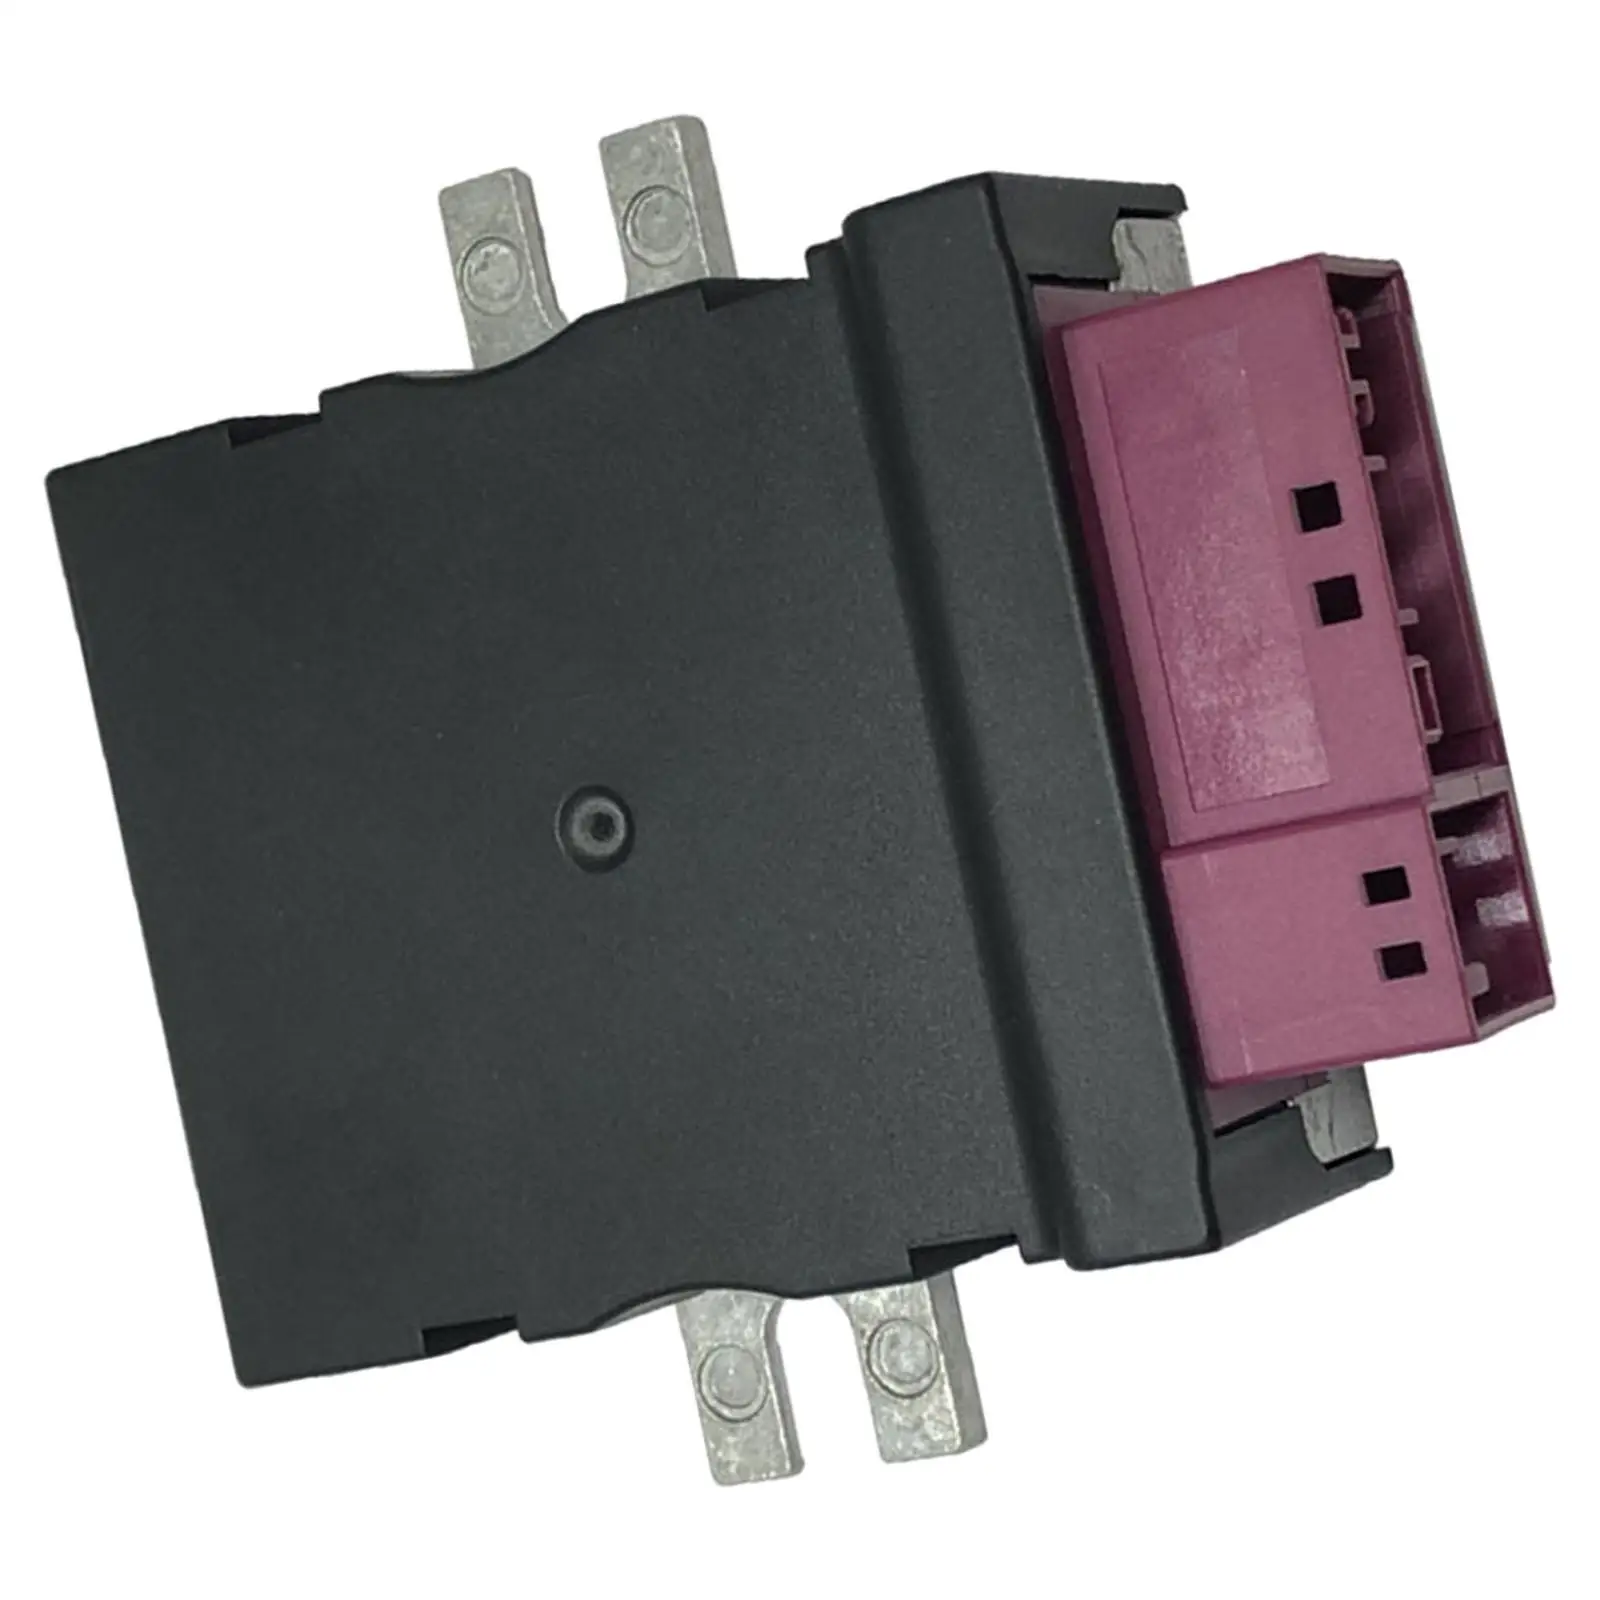 Fuel Pump Control Module 16147276073 for High Reliability Accessories High Performance